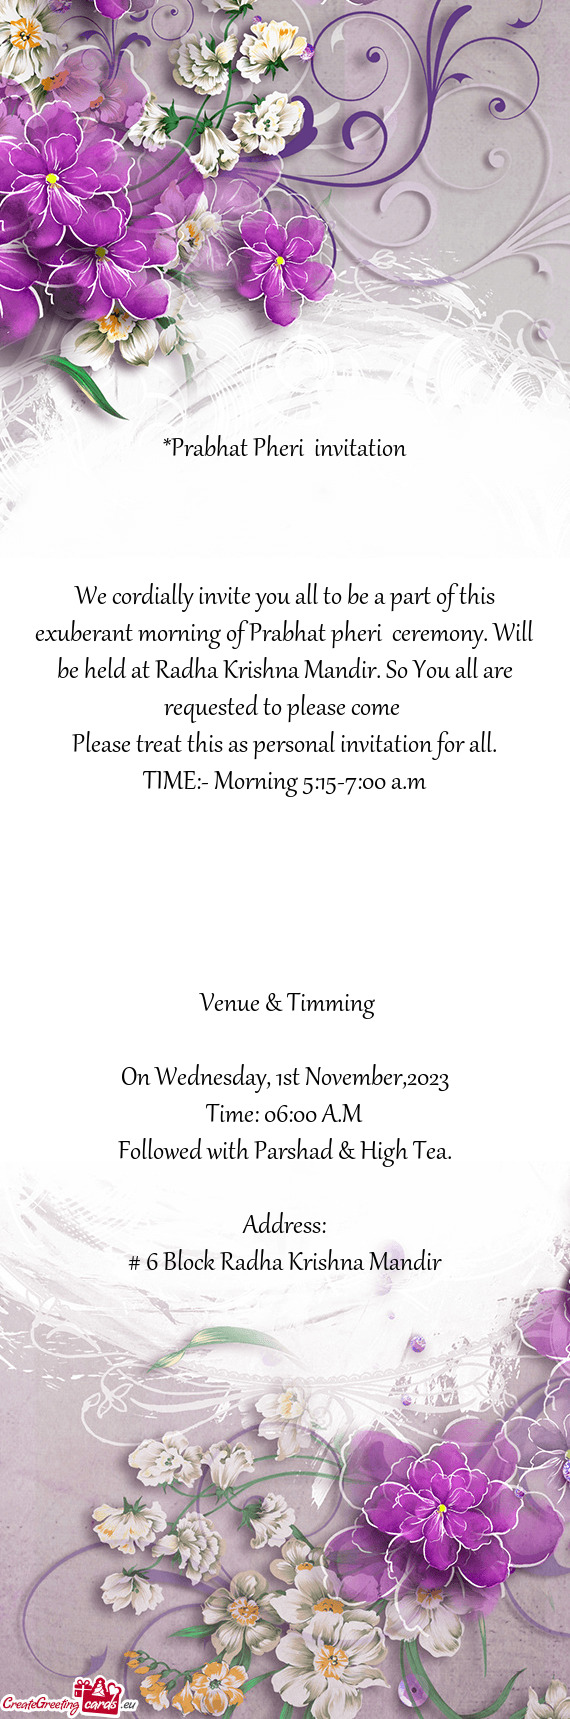 Be held at Radha Krishna Mandir. So You all are requested to please come